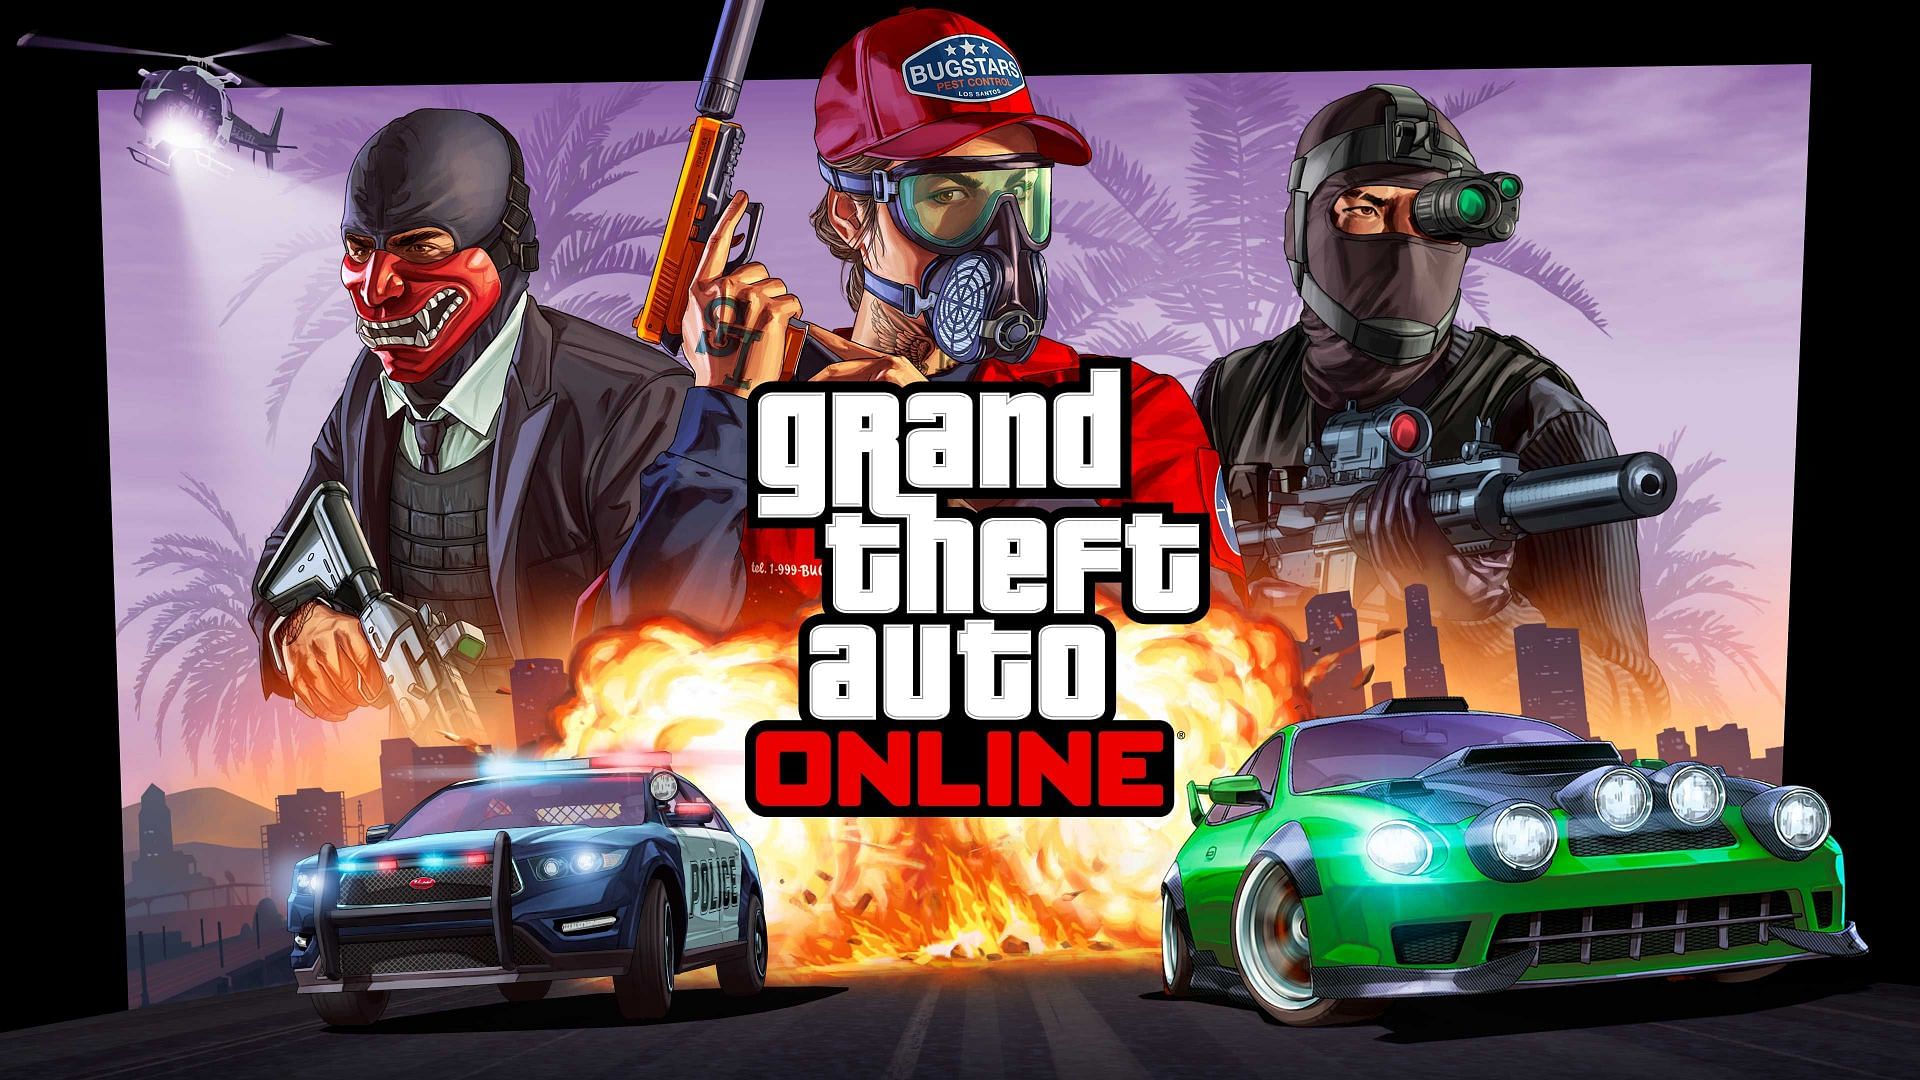 GTA Online technically counts as a gameplay feature in GTA 5 since you can access it from the latter game (Image via Rockstar Games)